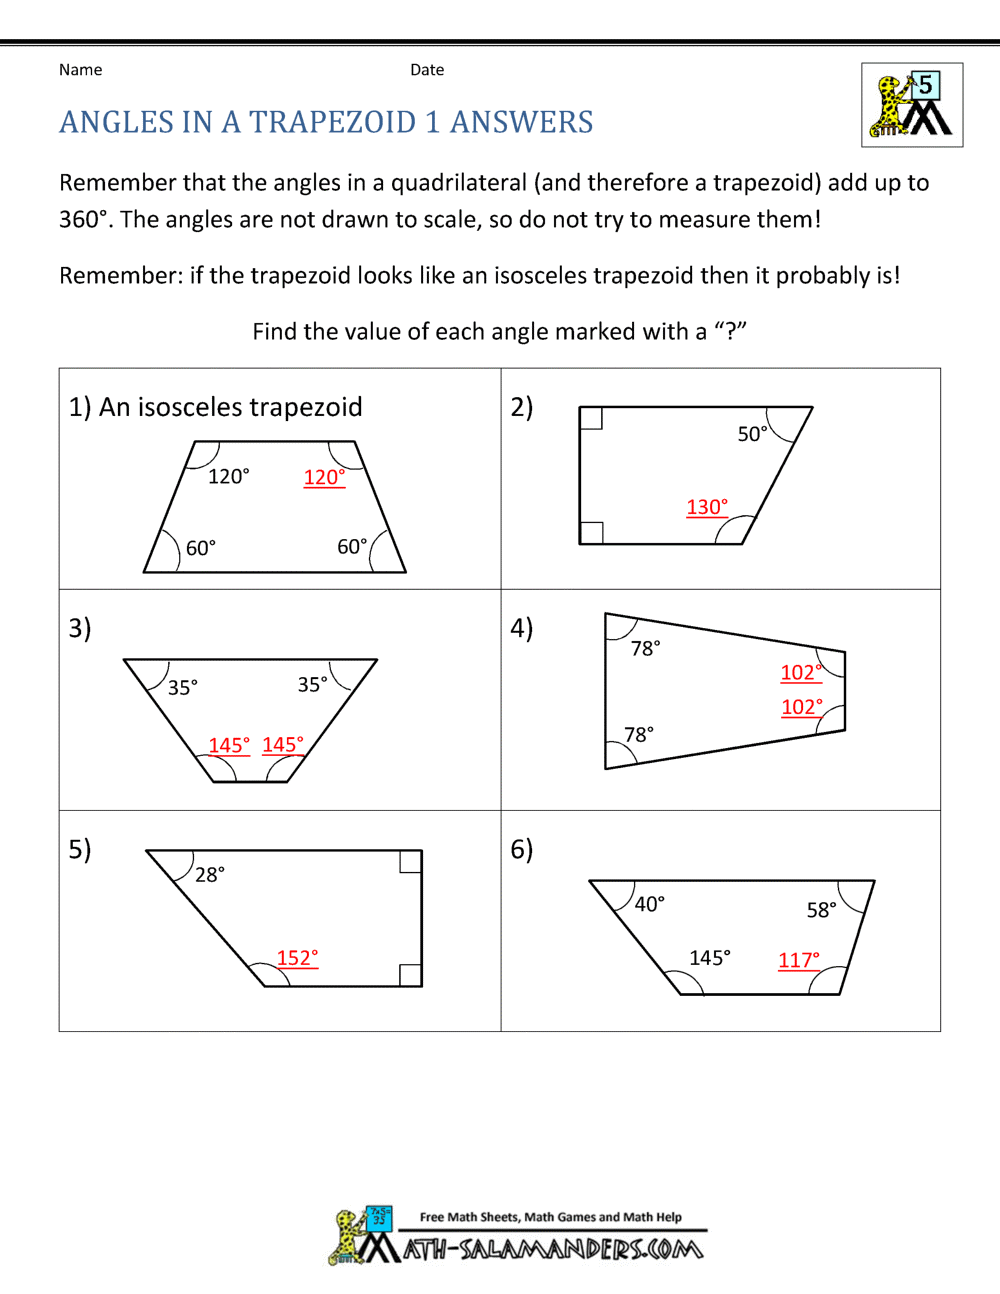 24th Grade Geometry Inside Lines And Angles Worksheet